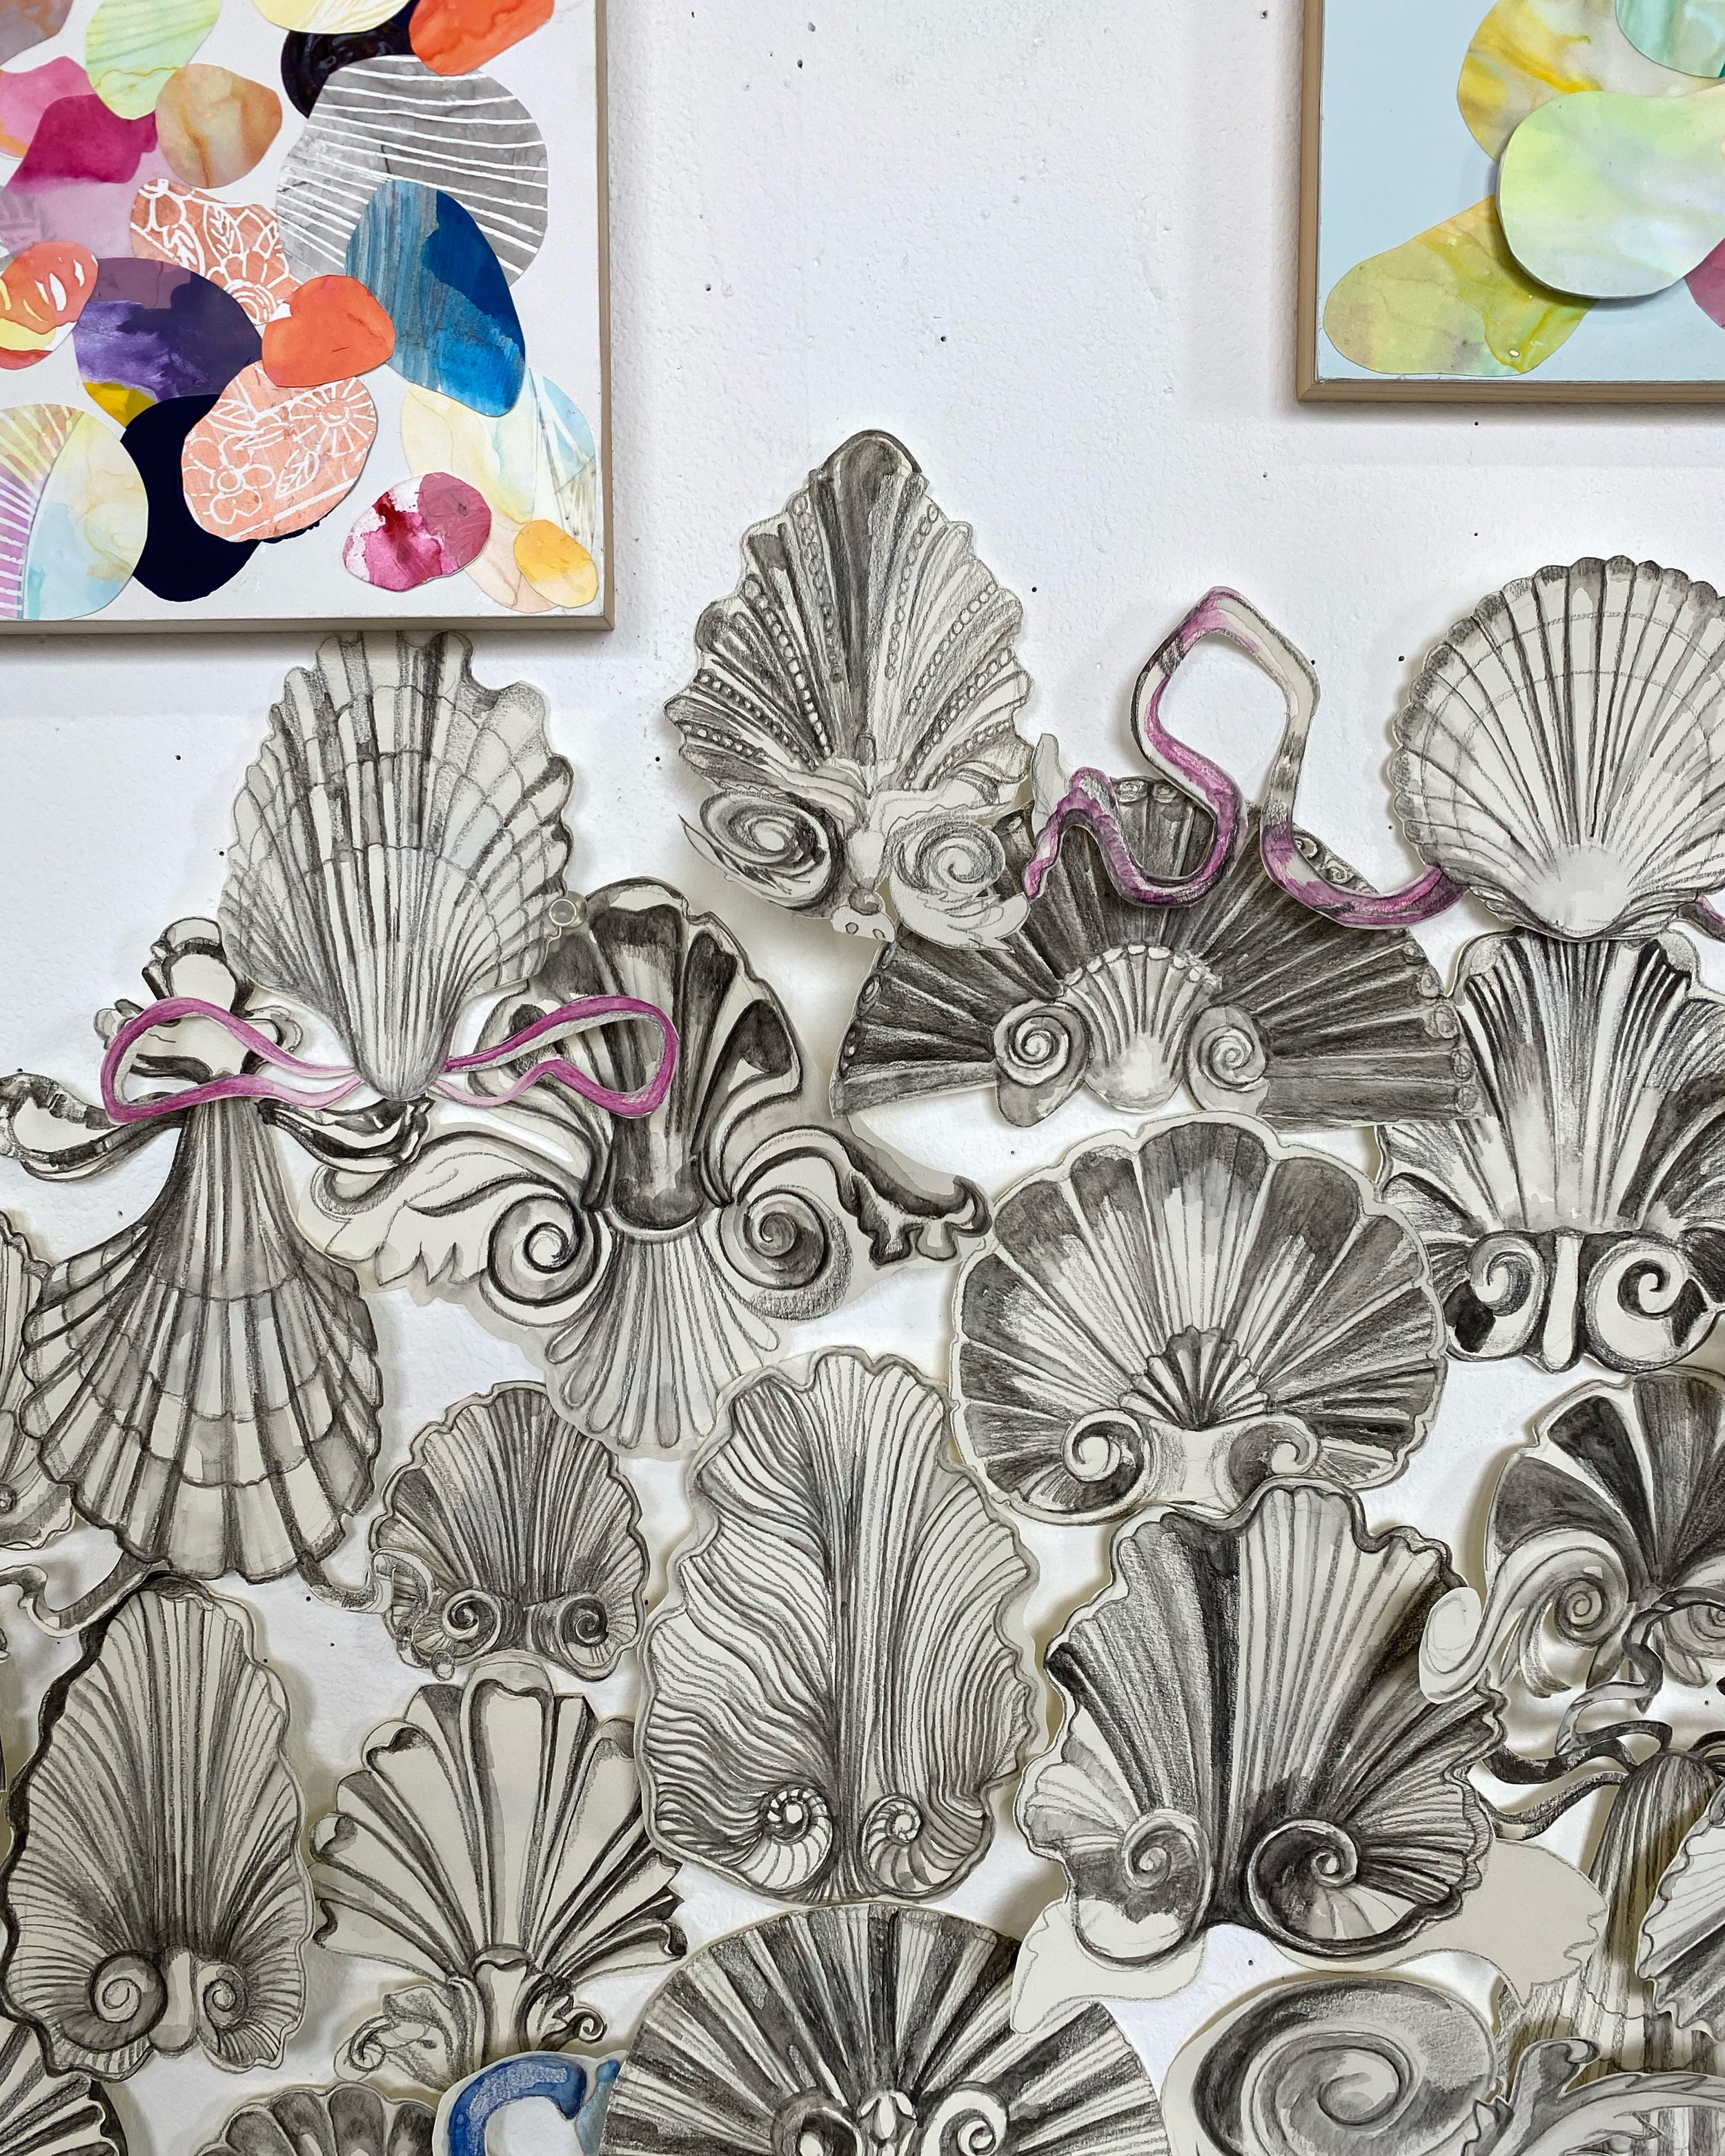 Detail of shell inspired drawings installed on the wall